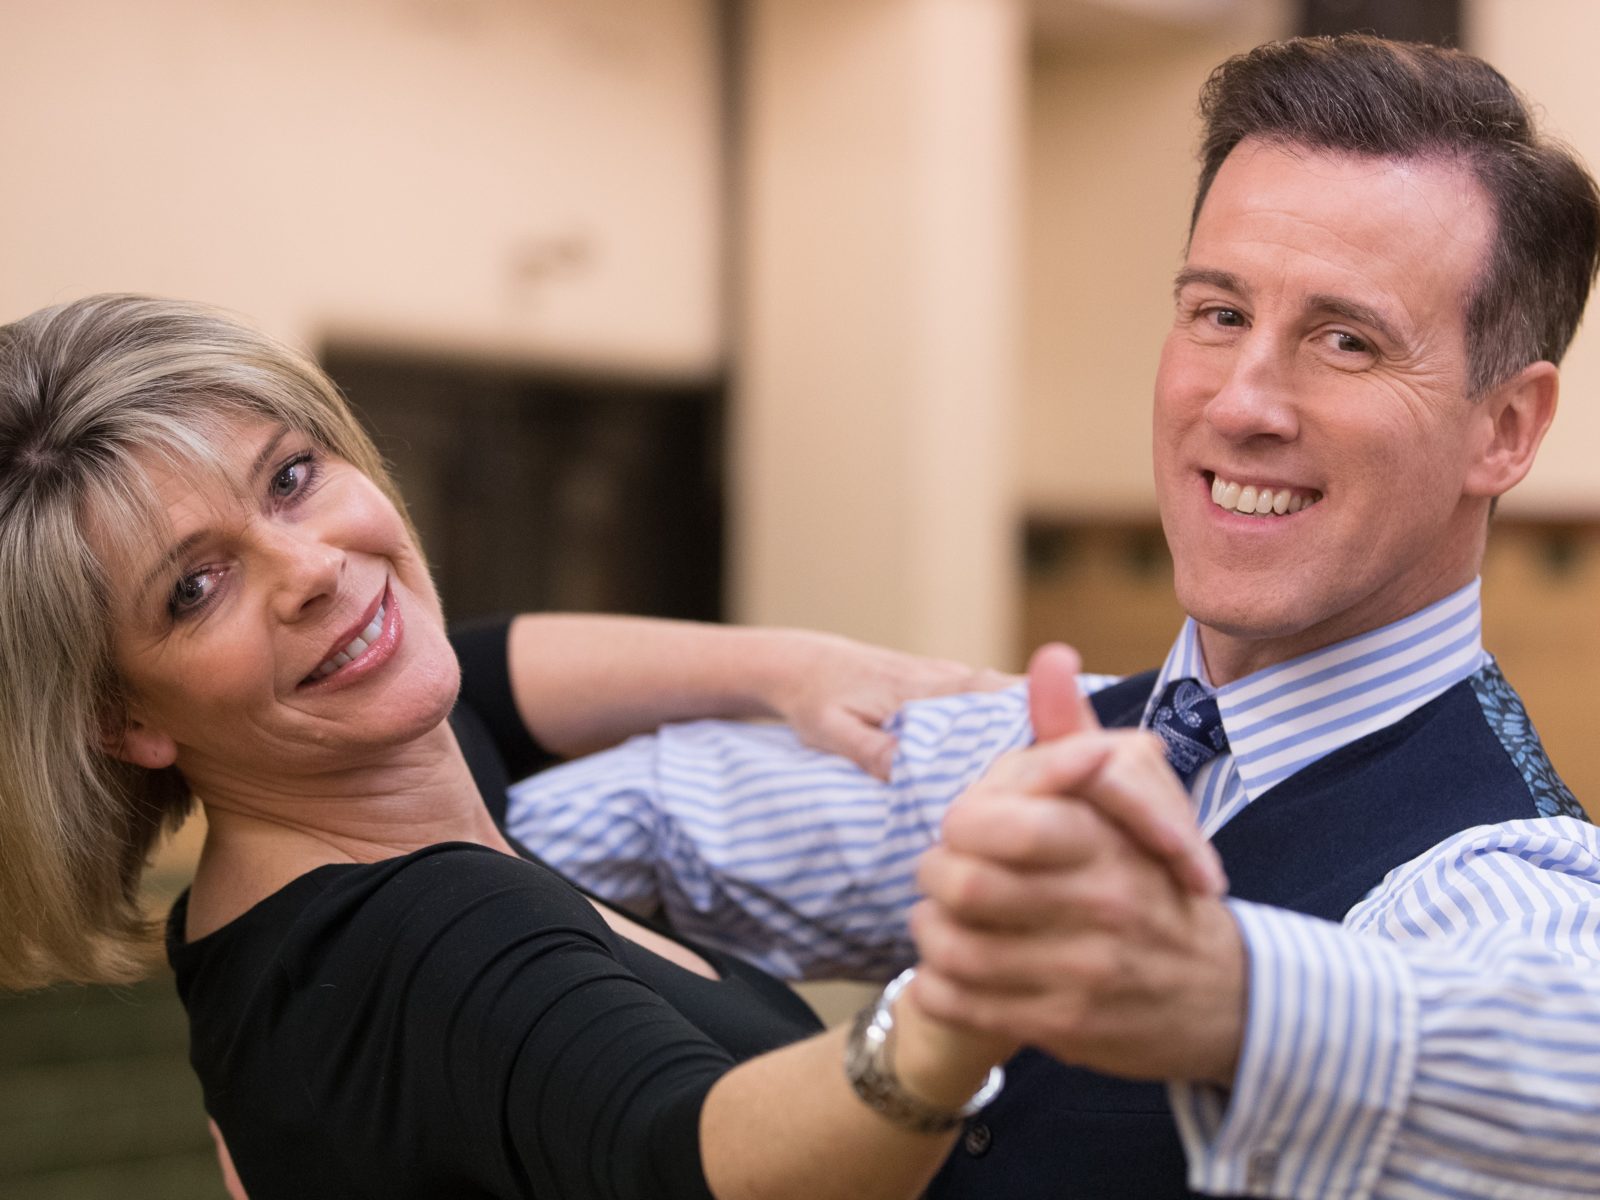 Anton Du Beke partnered with Ruth Langsford age 57 on Strictly Come Dancing